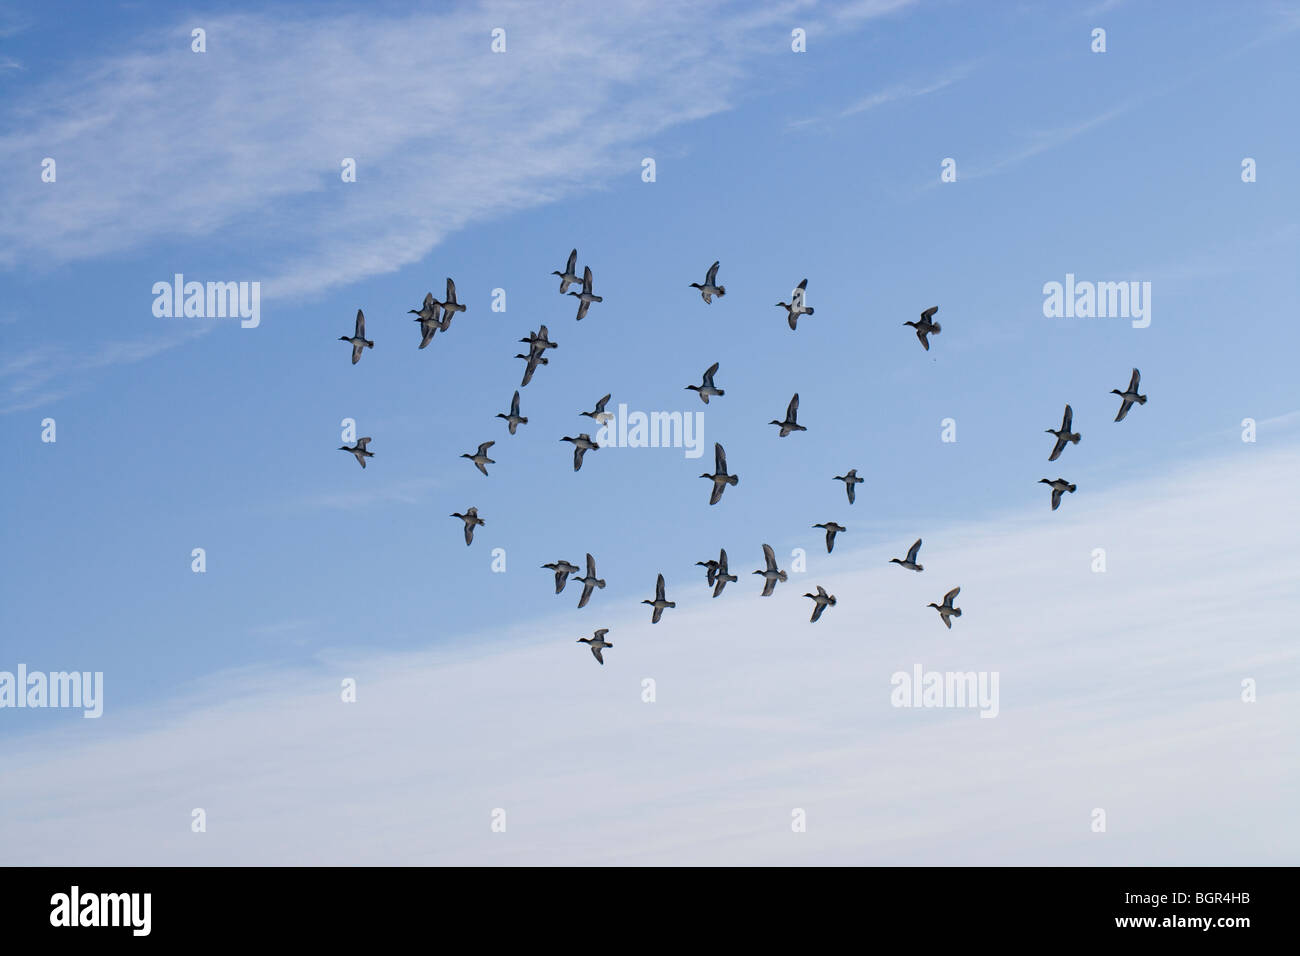 European Green-winged Teal (Anas crecca). 'Spring' of Teal in flight. Stock Photo